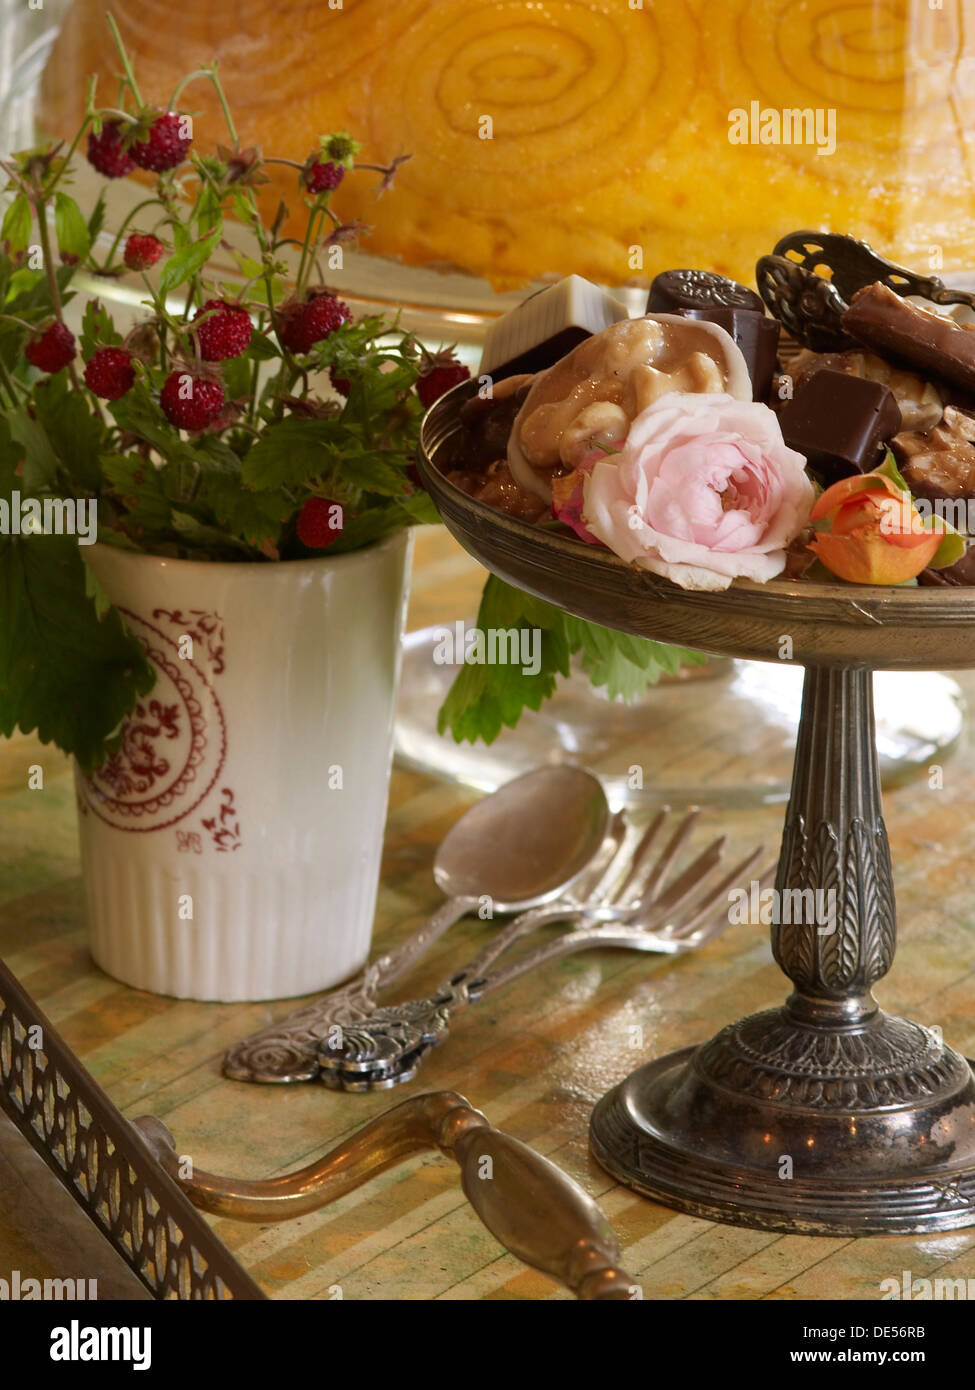 Chocolates in an antique bowl on a stylishly decorated coffee table Stock Photo